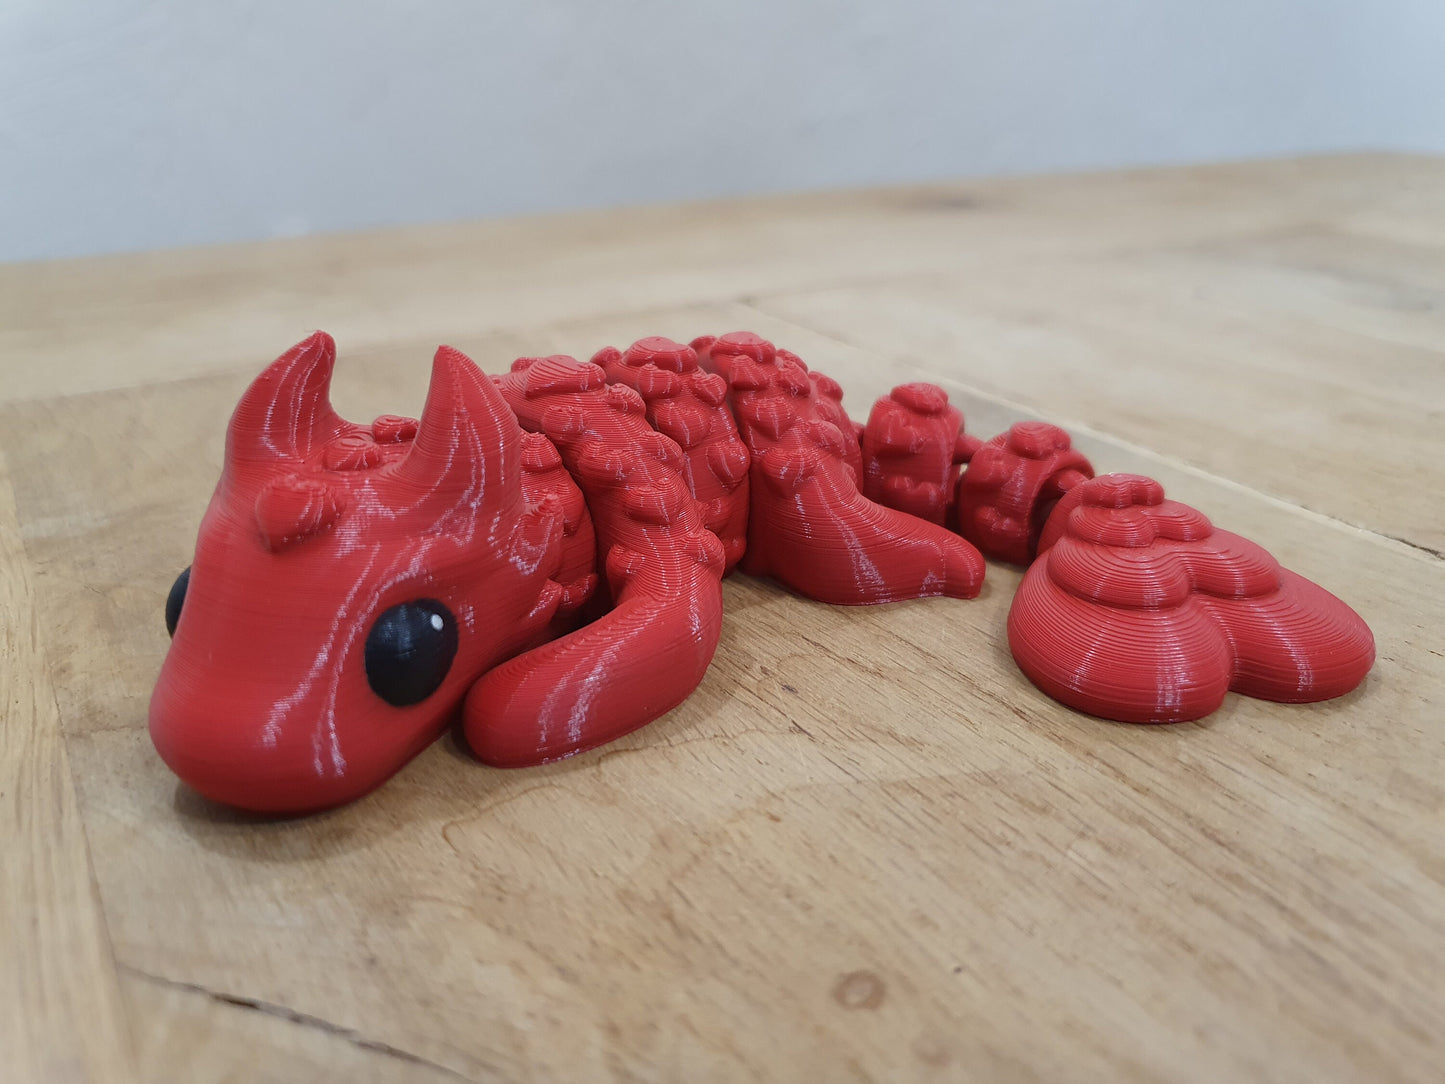 Baby Love Dragon - Articulated Flexible 3D Print. Professionally Hand painted finishing details - Valentines Day Gift